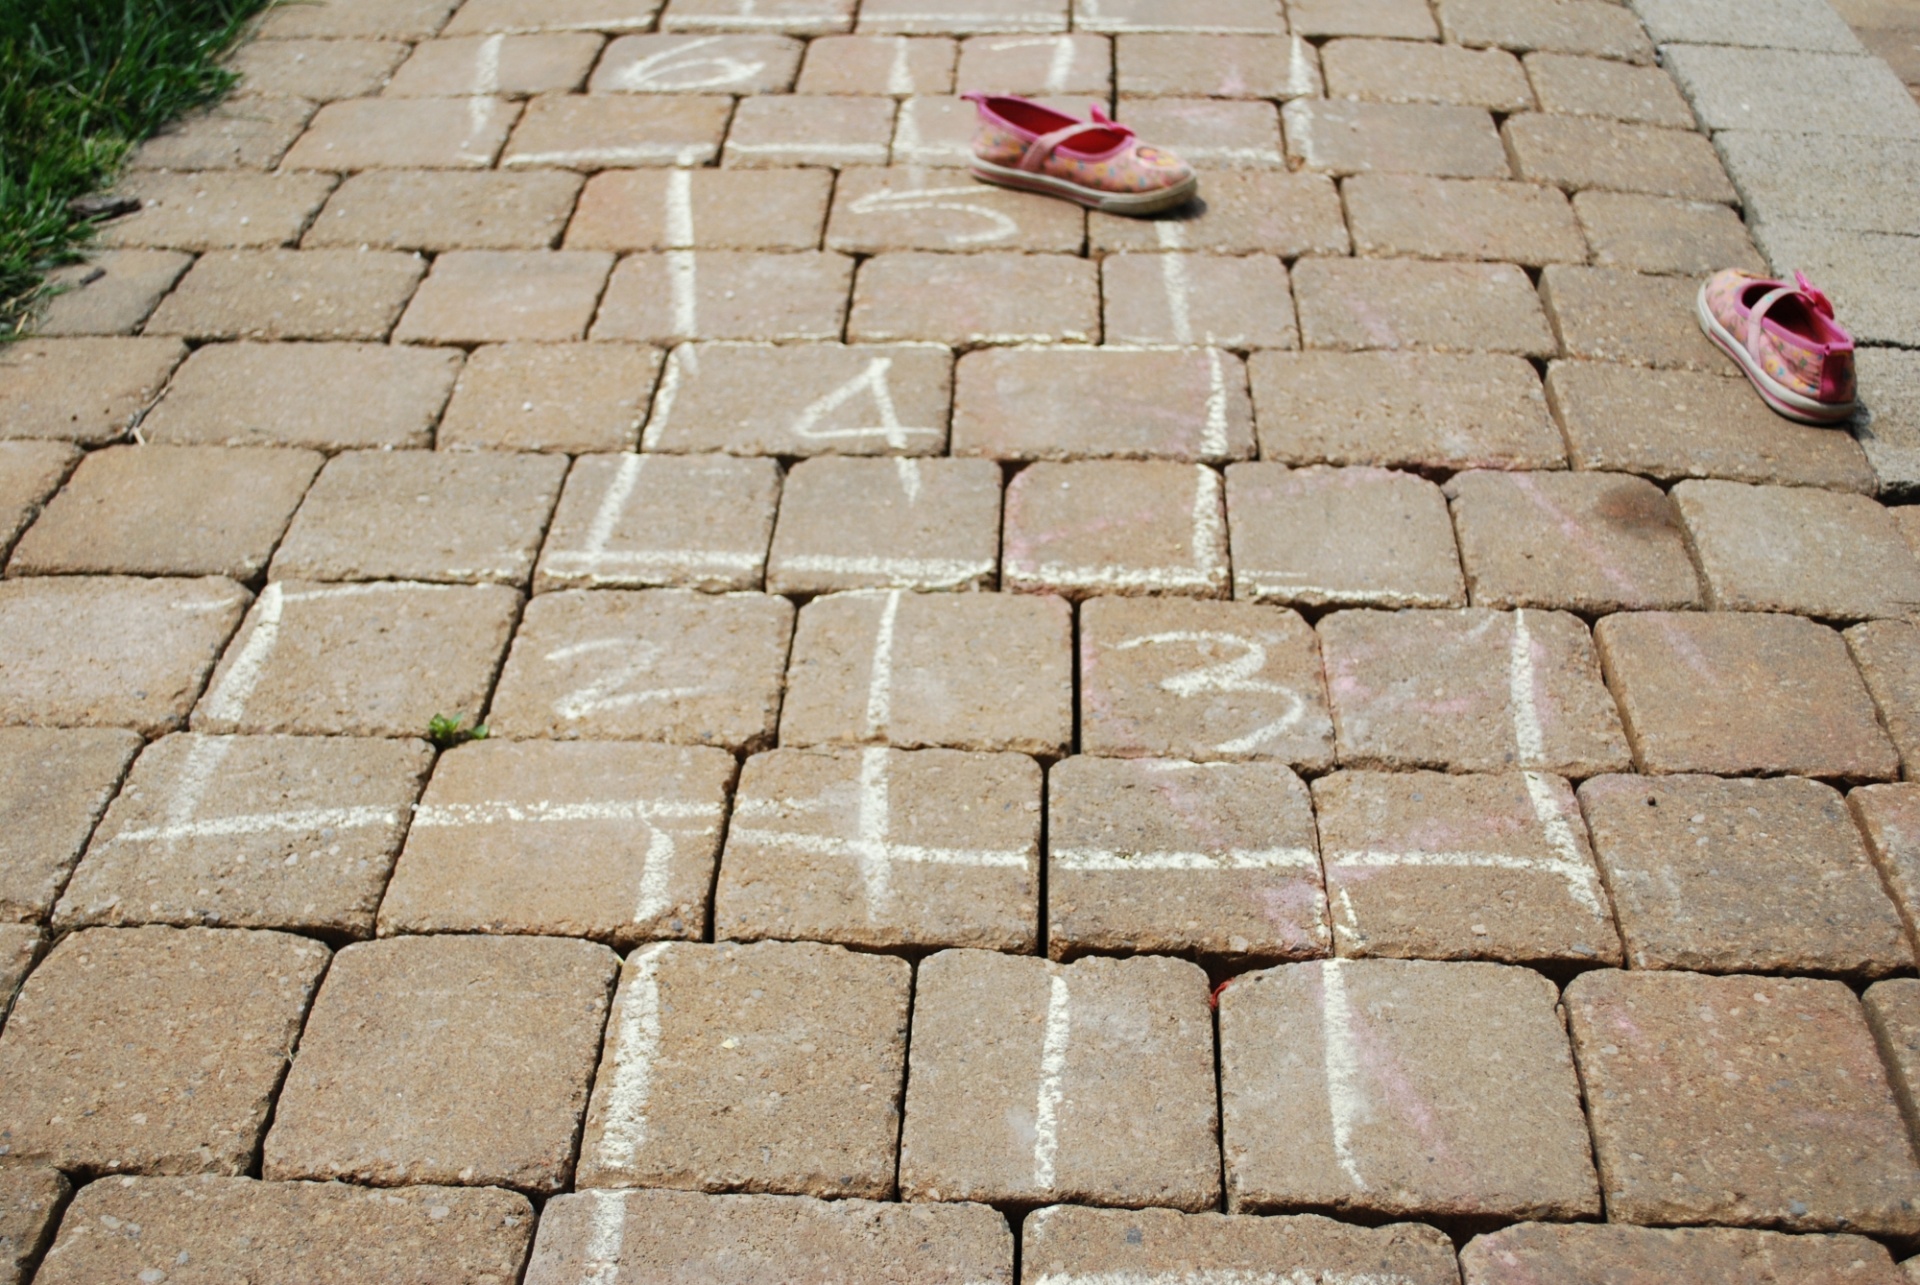 Hop scotch game drawn on cobble stone sidewalk with children's shoes